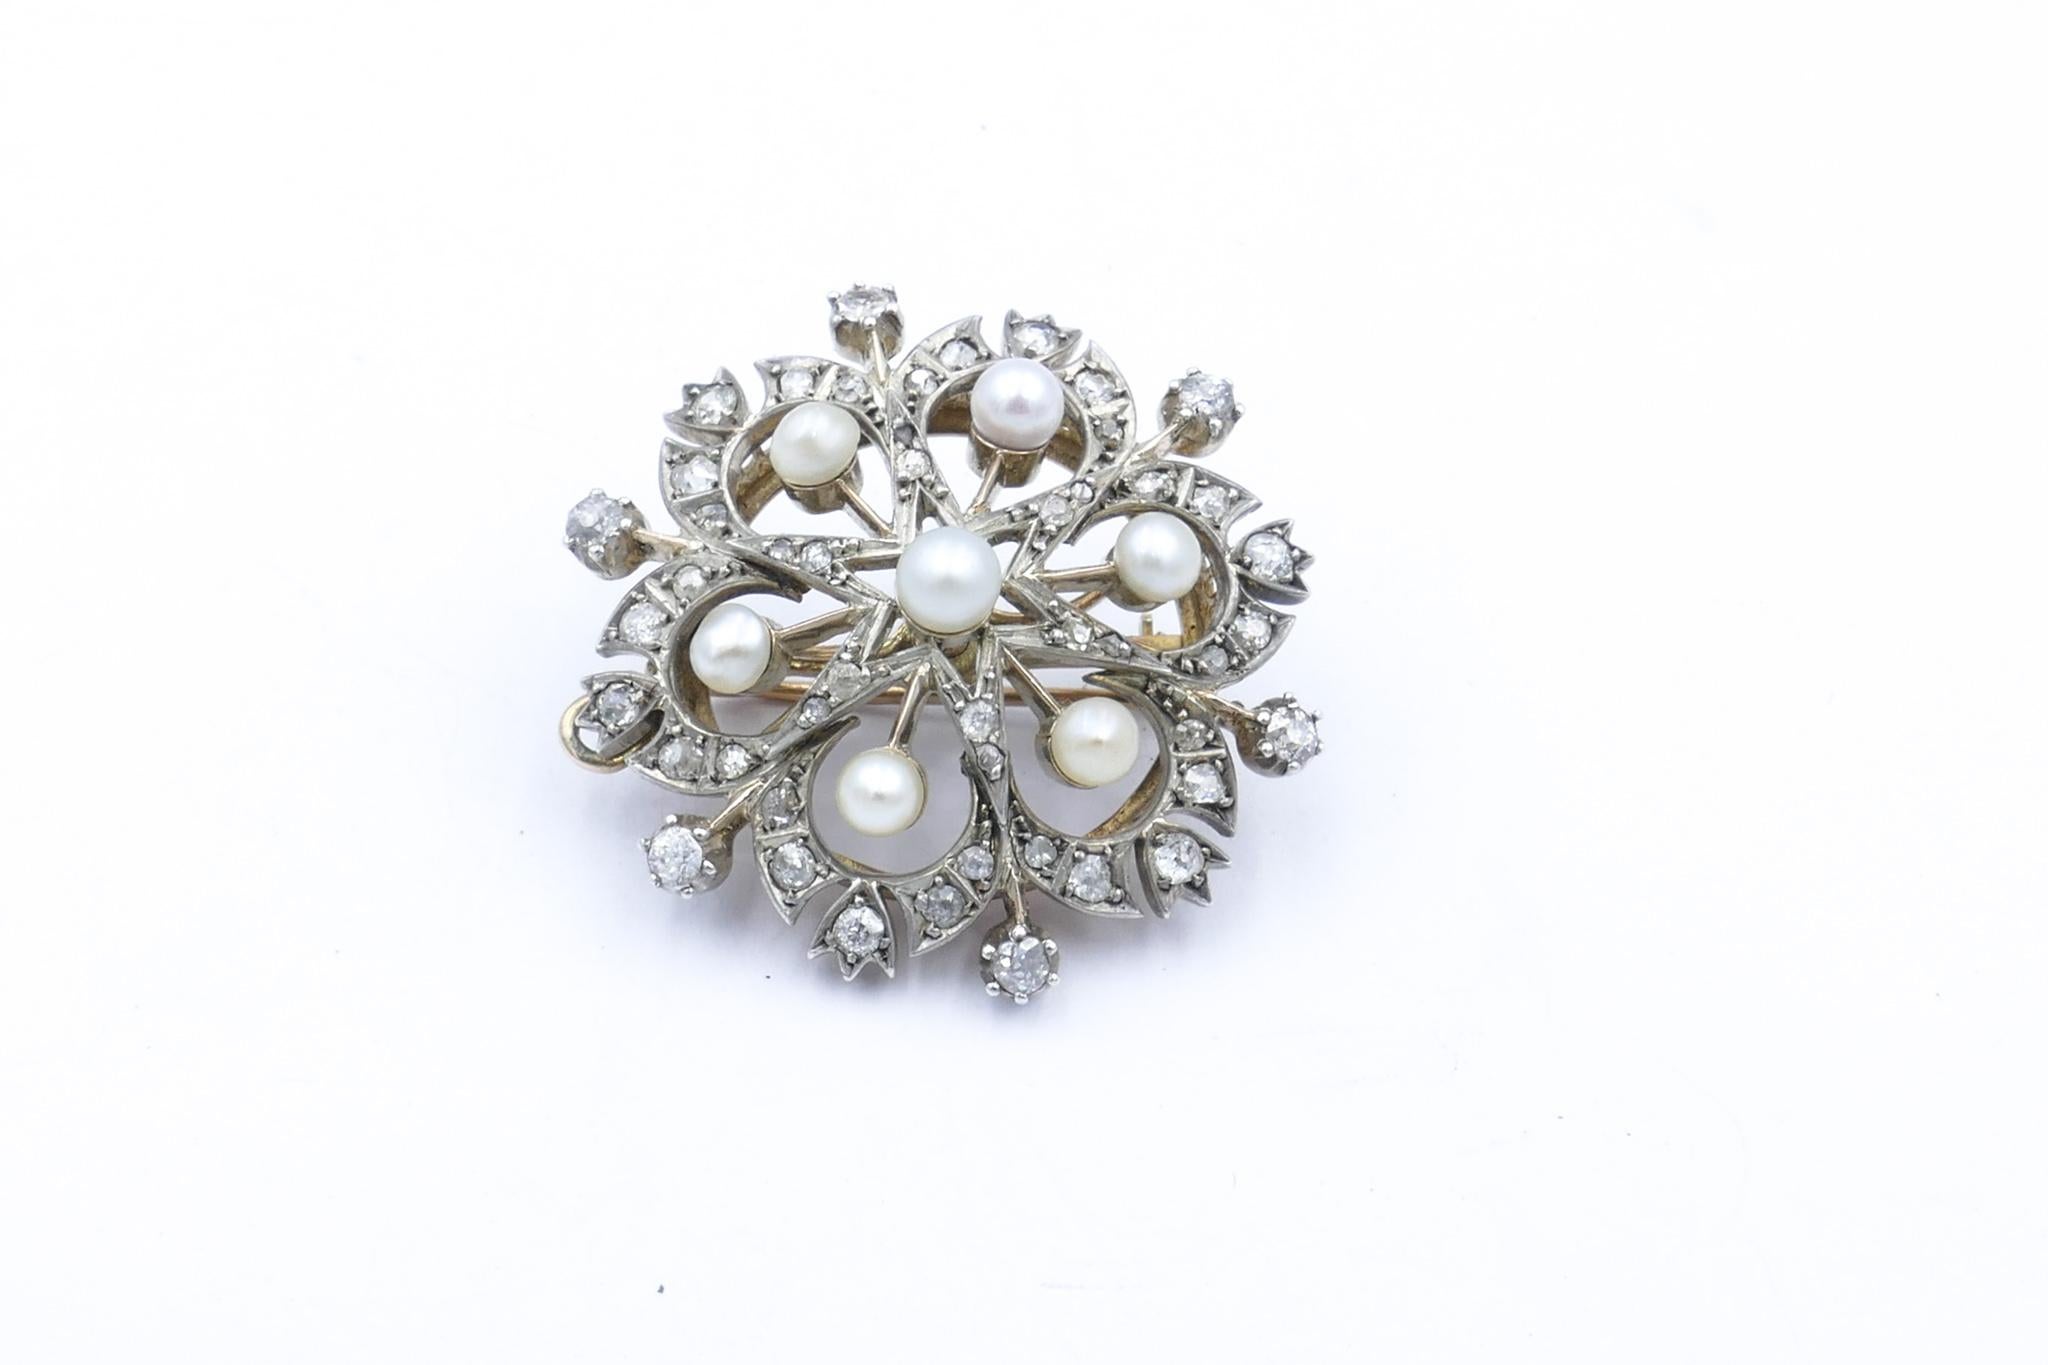 7 Cultured Pearls 4.24mm - 4.35mm diameter, near round, white with cream overtones add the highlight to this beautiful piece of Victoriana, a Snow Flake Pendant with the additional wear as a Brooch.
The Pearls centre 48 Diamonds of mixed cut Old